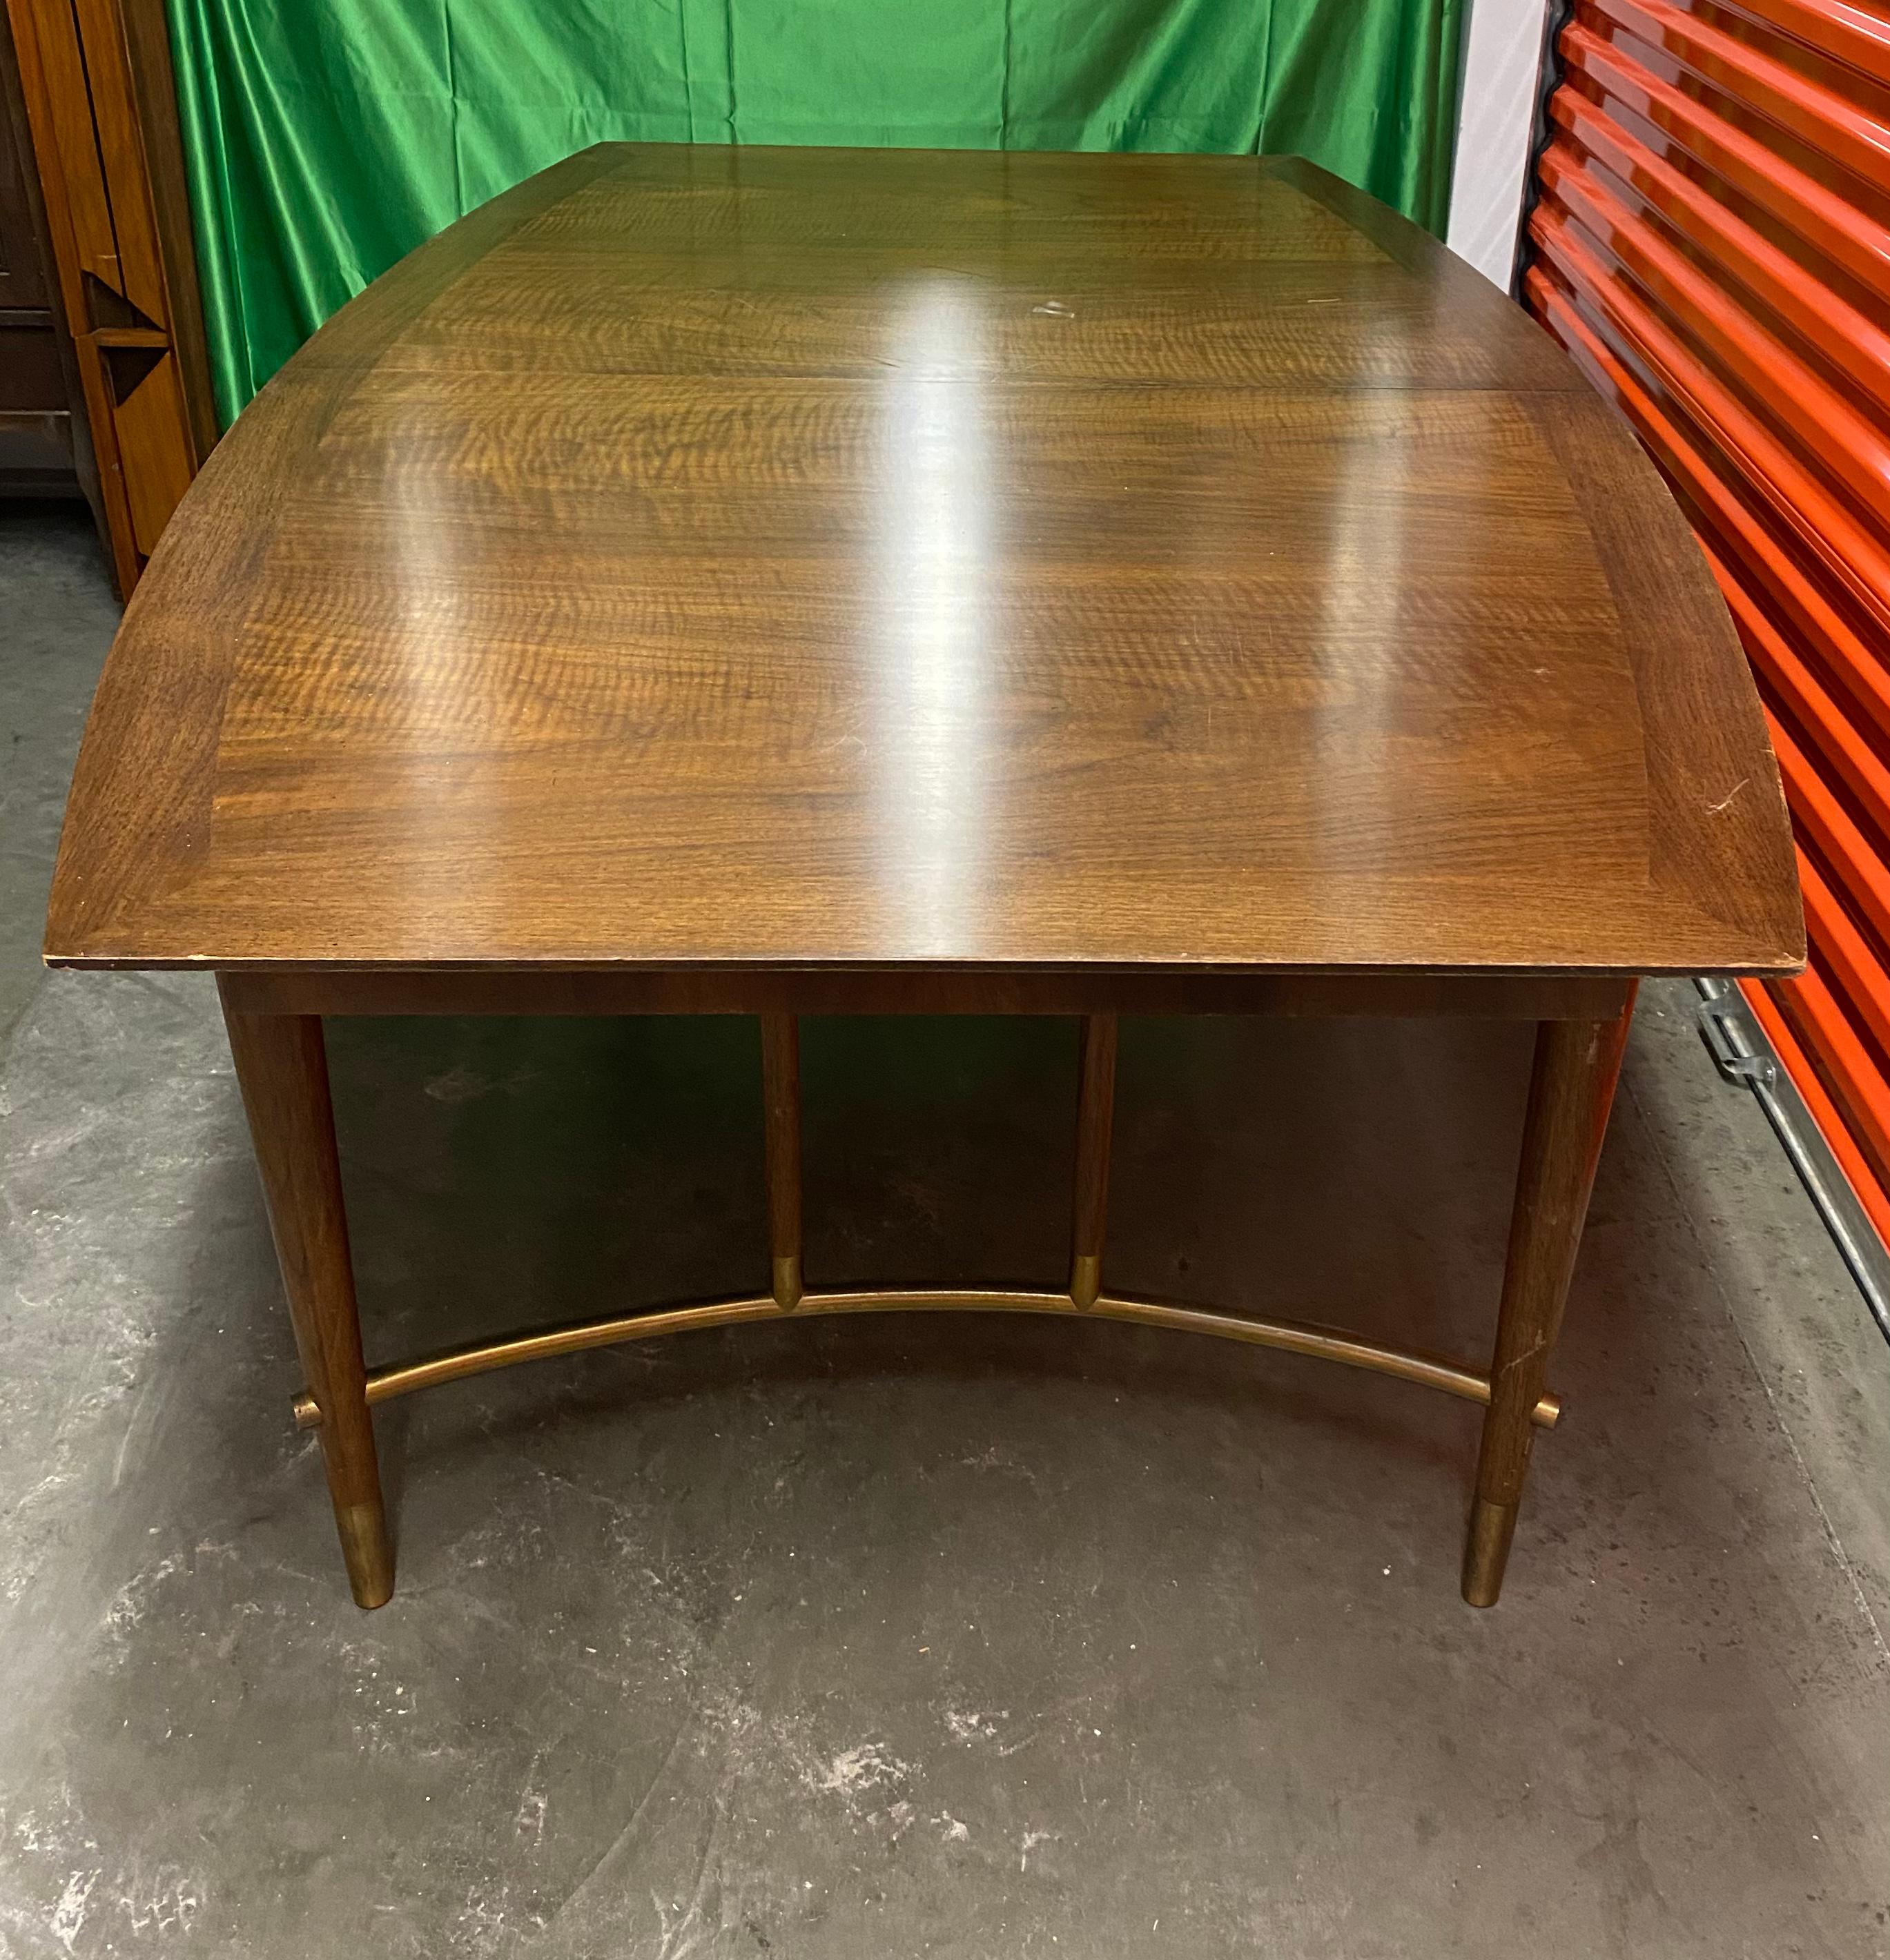 Bert England Mid-Century Modern Walnut and Brass Dining Table with Curved Shape In Good Condition For Sale In Downingtown, PA